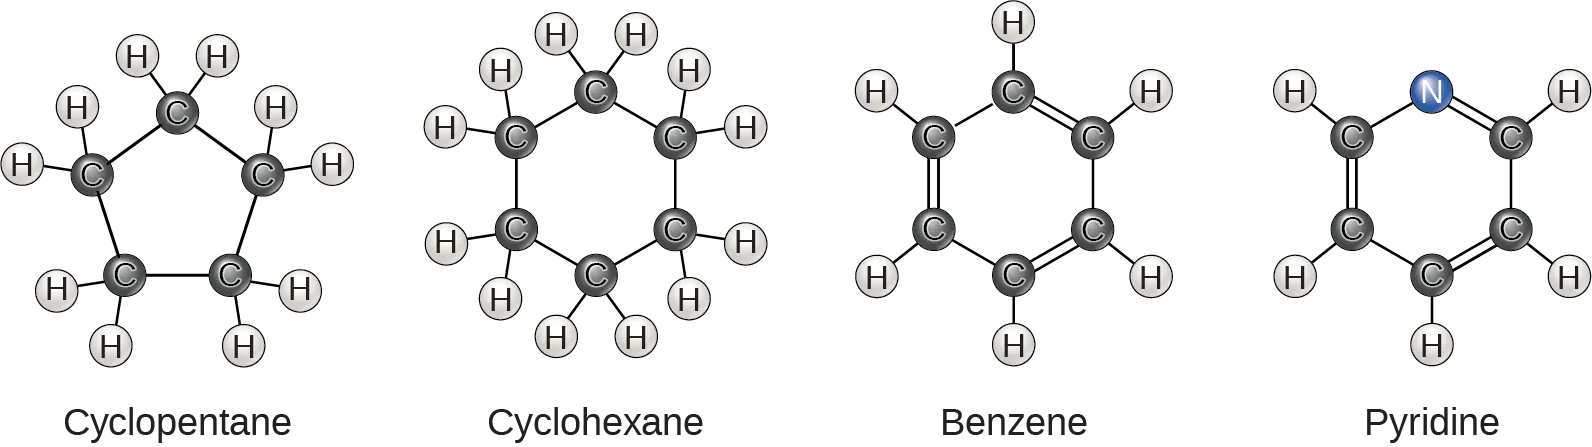 Four molecular structures are shown. Cyclopentane is a ring consisting of five carbons, each with two hydrogens attached. Cyclohexane is a ring of six carbons, each with two hydrogens attached. Benzene is a six-carbon ring with alternating double bonds. Each carbon has one hydrogen attached. Pyridine is the same as benzene, but a nitrogen is substituted for one of the carbons. No hydrogens are attached to the nitrogen.